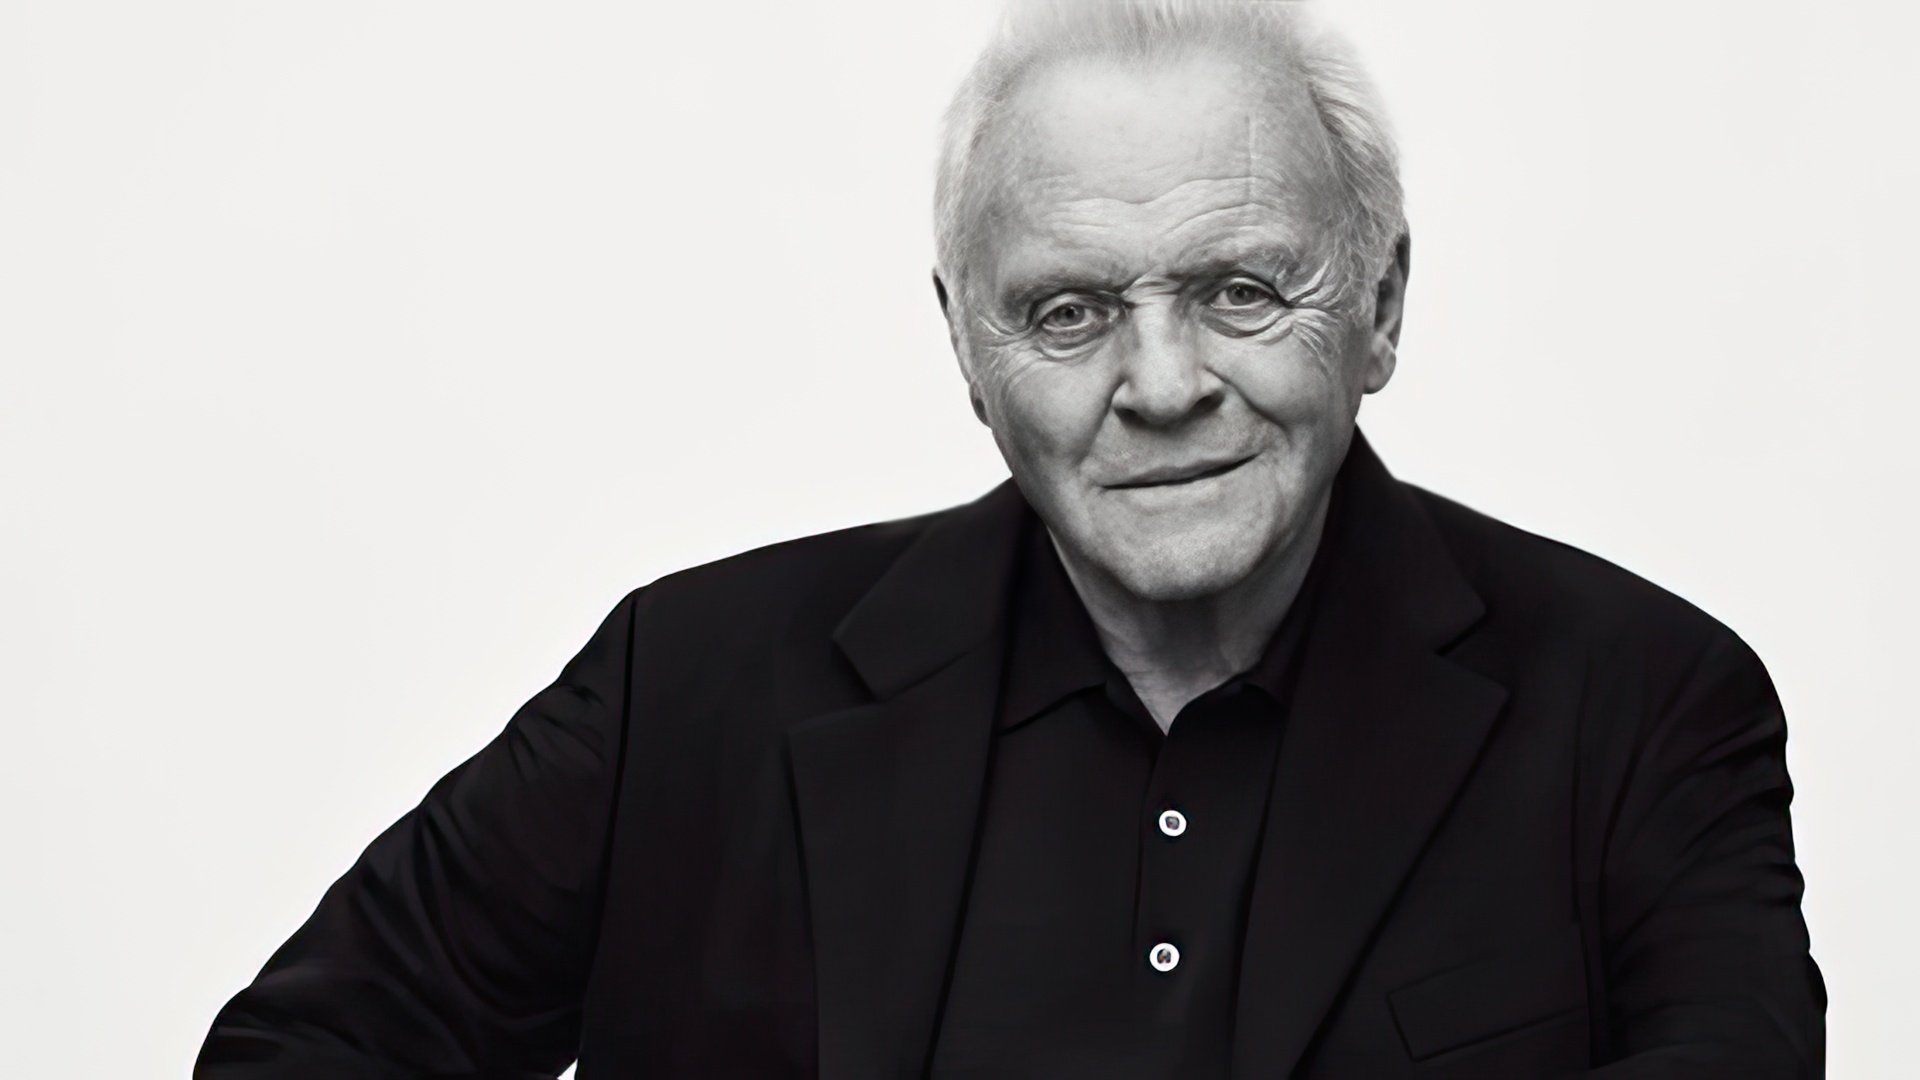 Sir Anthony Hopkins - a genius actor, despite the age, goes on shooting